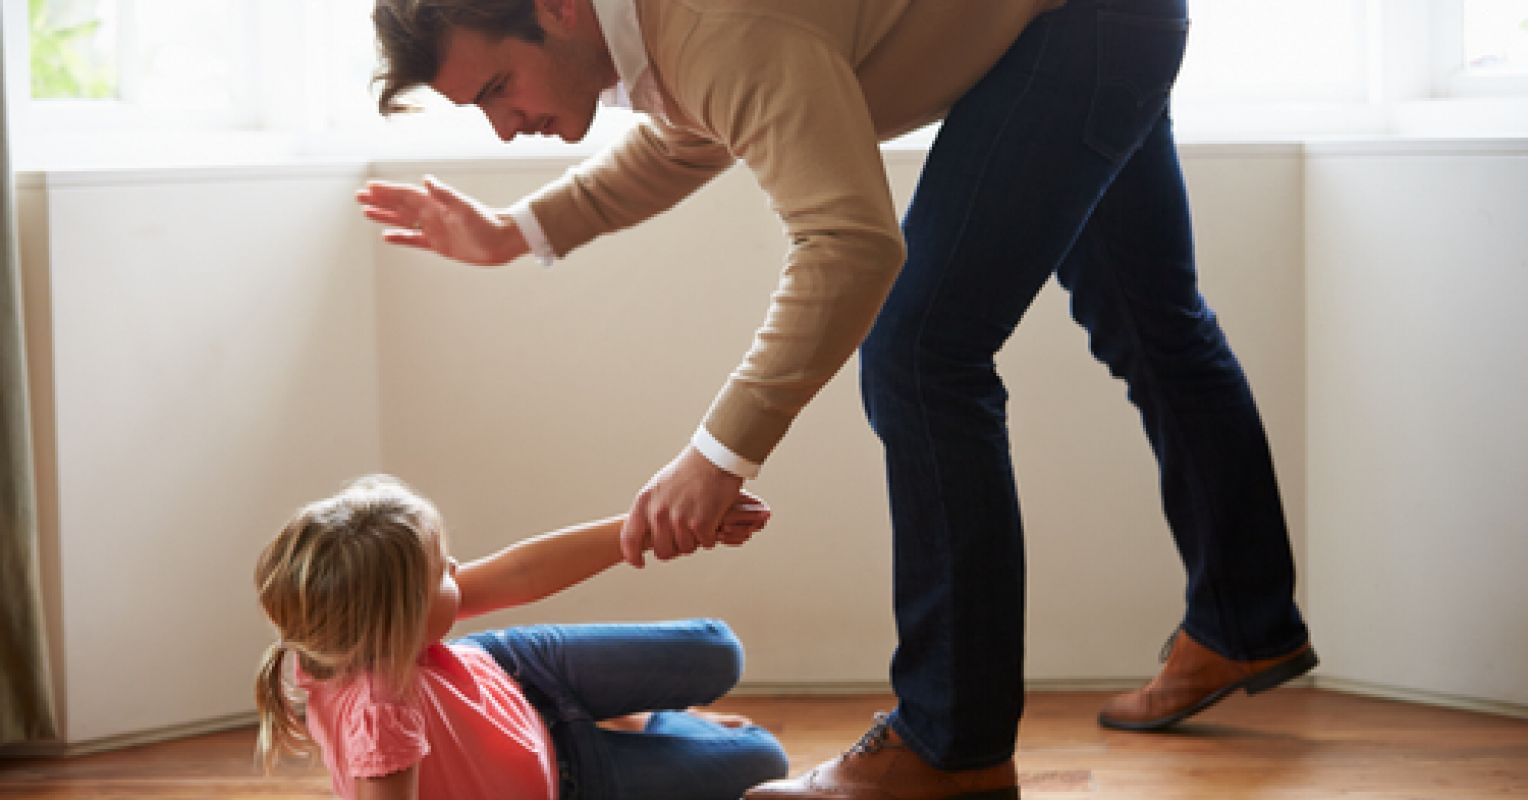 Why Parents Still Spank Even Though They Know They Shouldn't